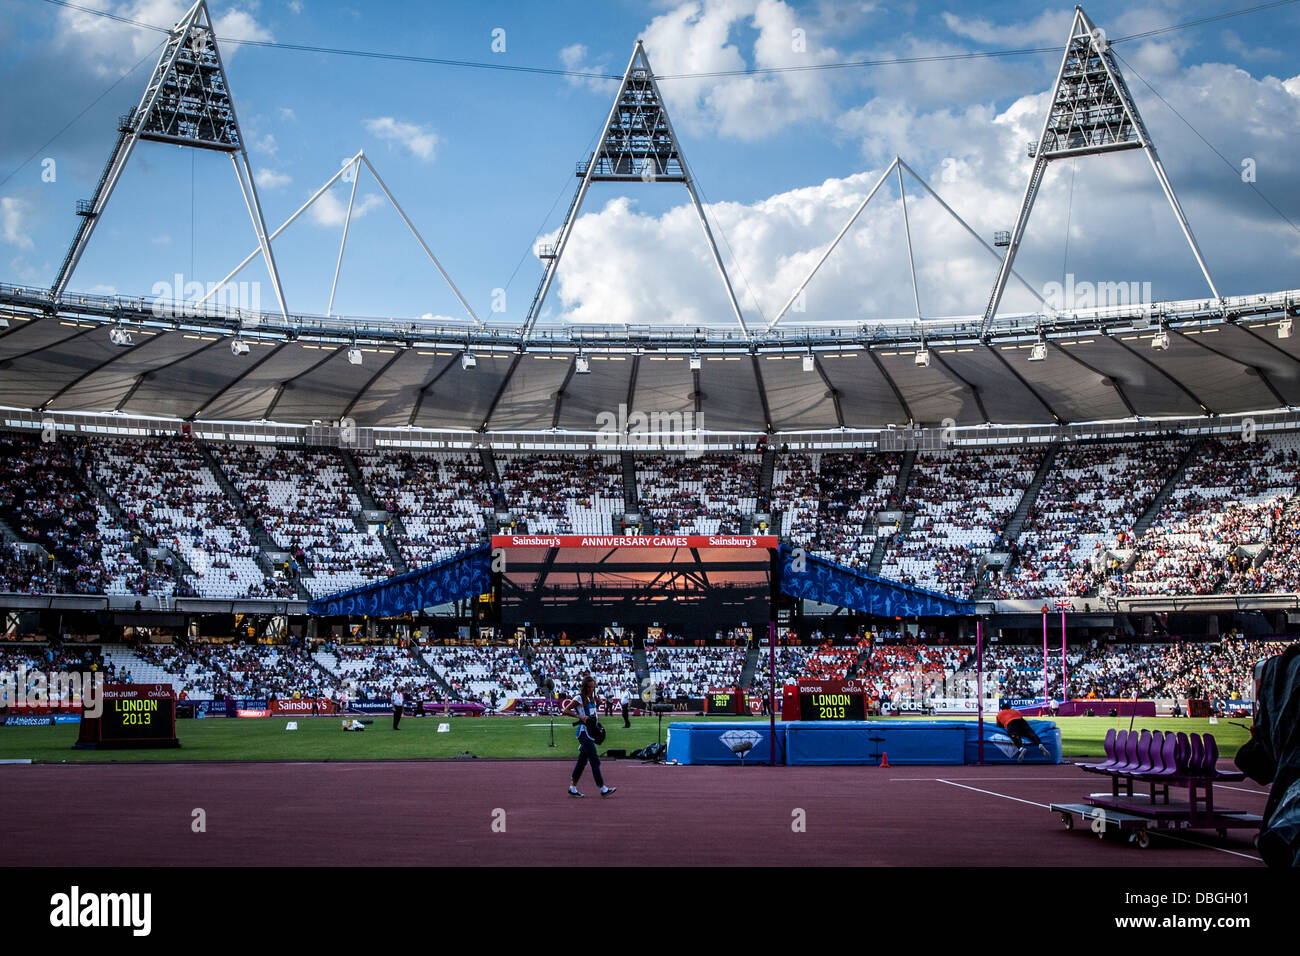 Inside the Olympic Stadium, 60,000 people in attendance, dramatic blue sky over Olympic Stadium, London, Anniversary Games. Stock Photo